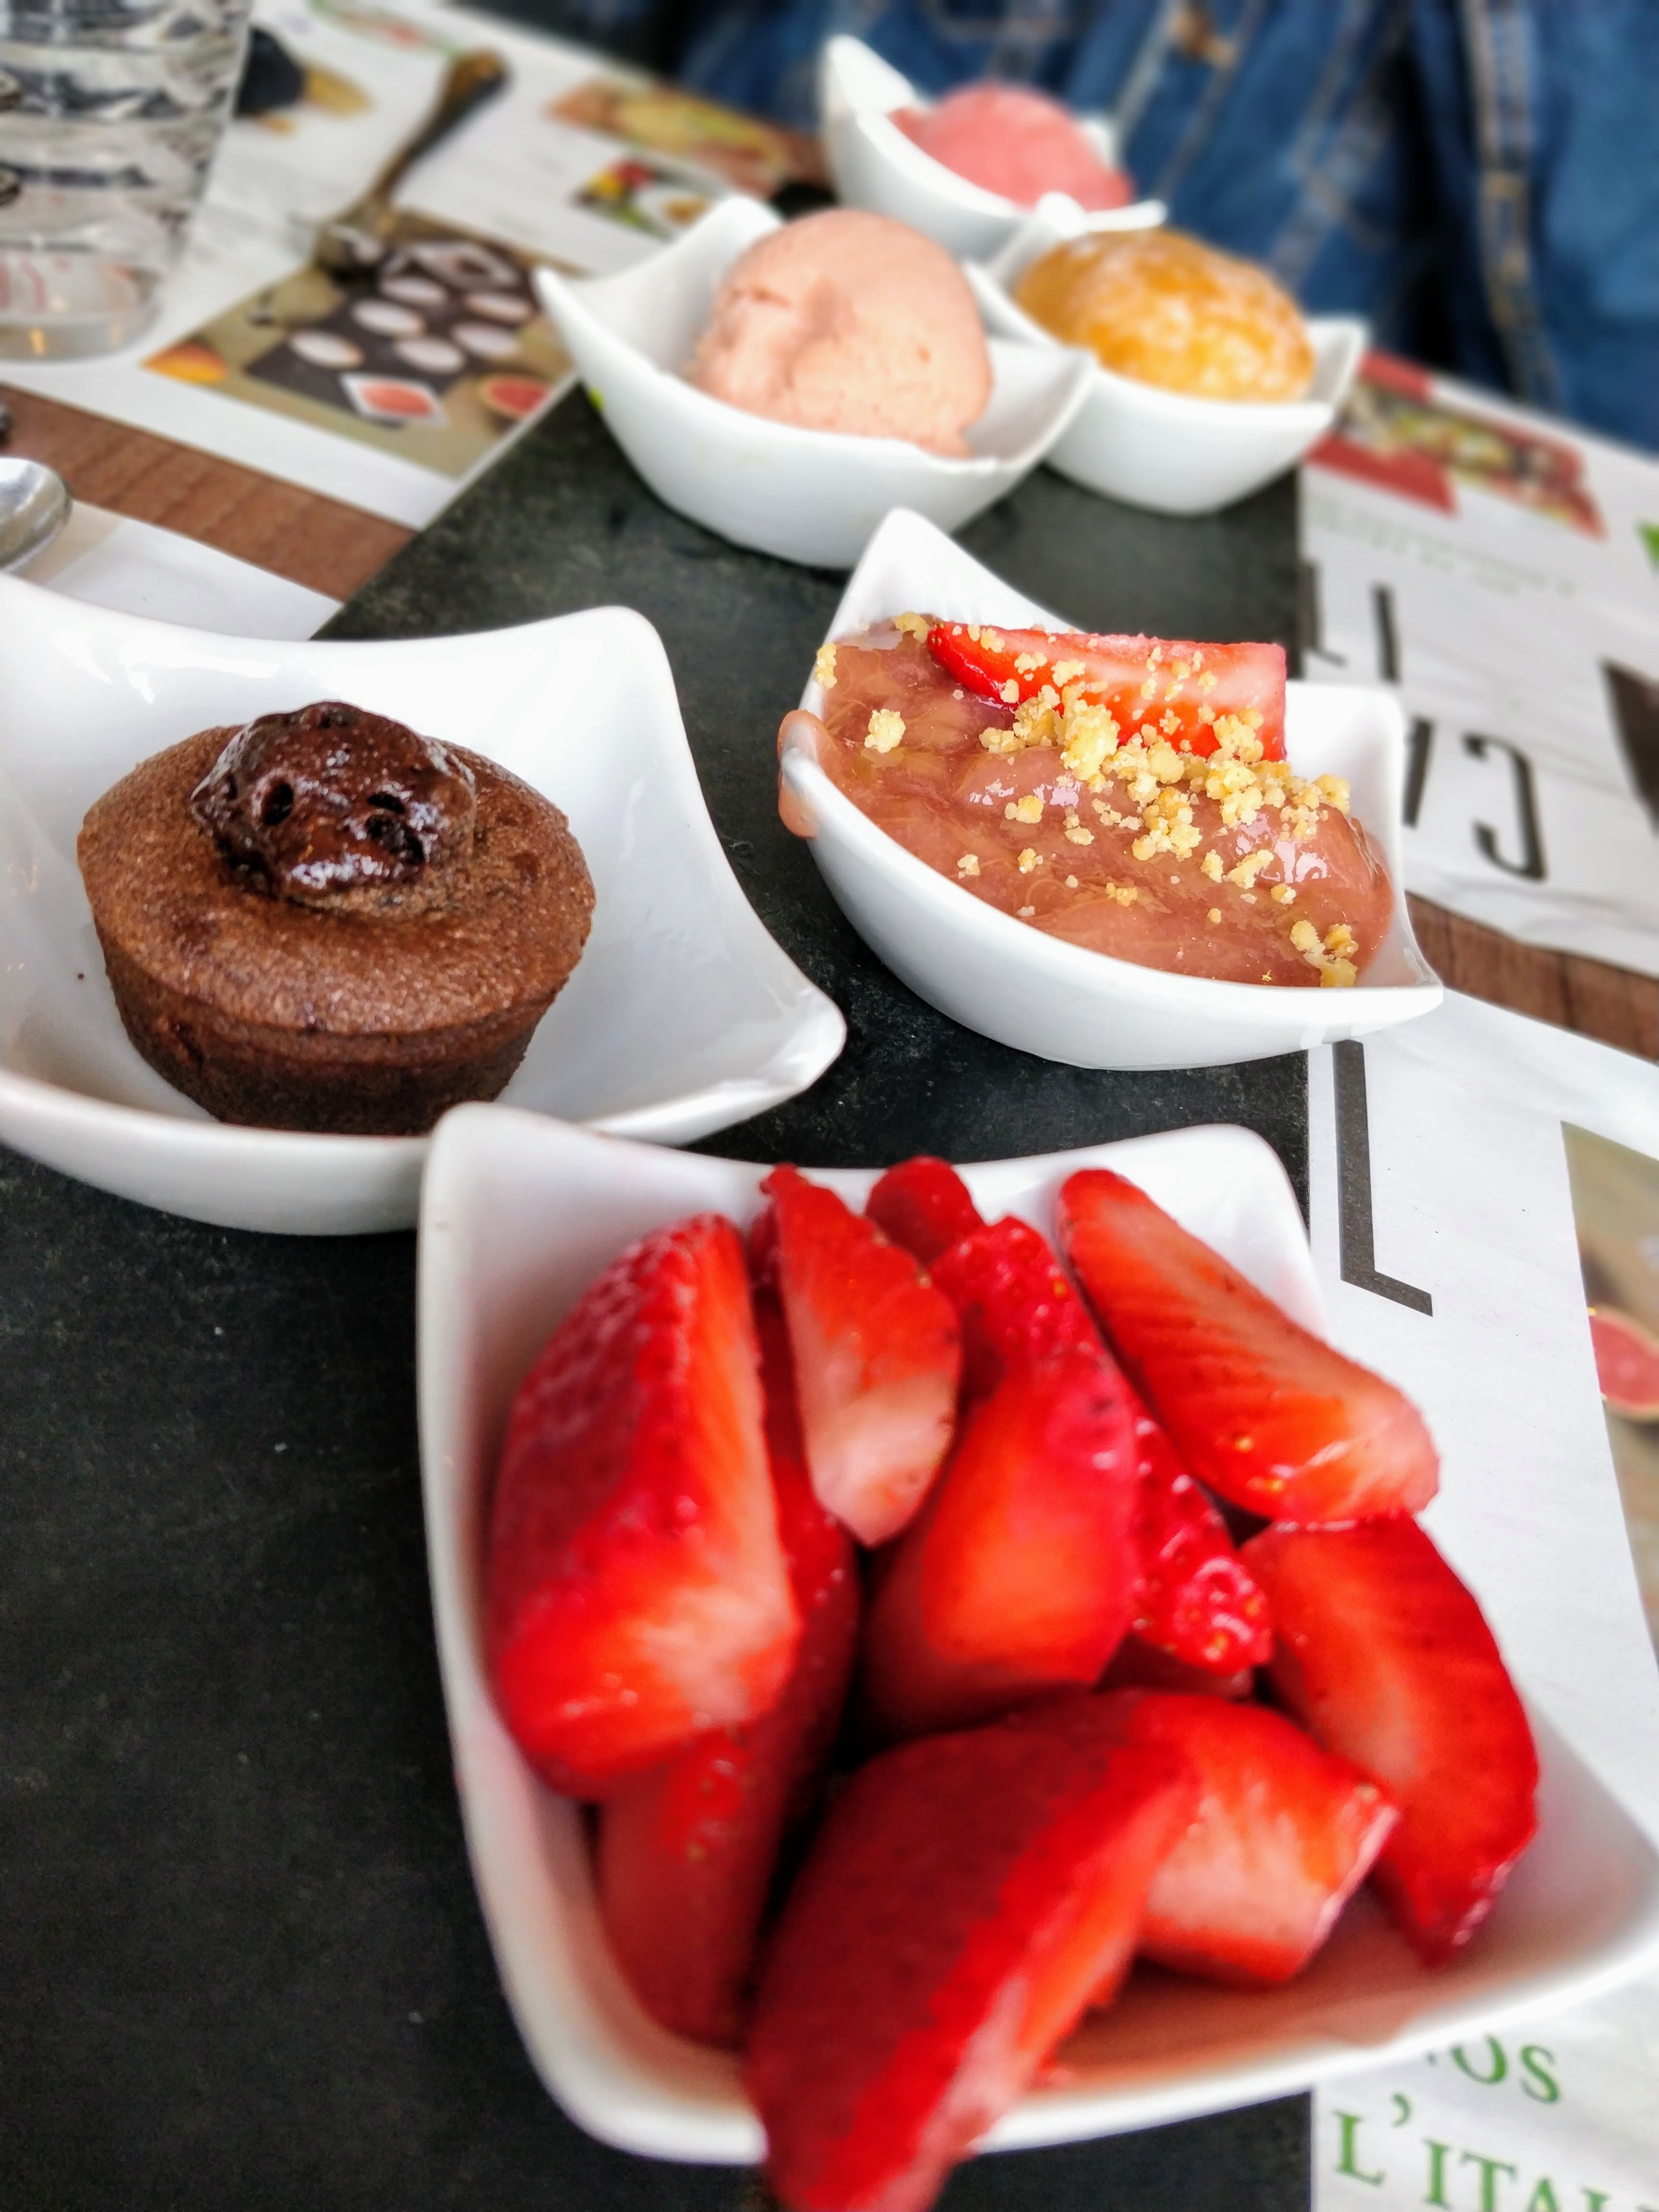 Selection of desserts.